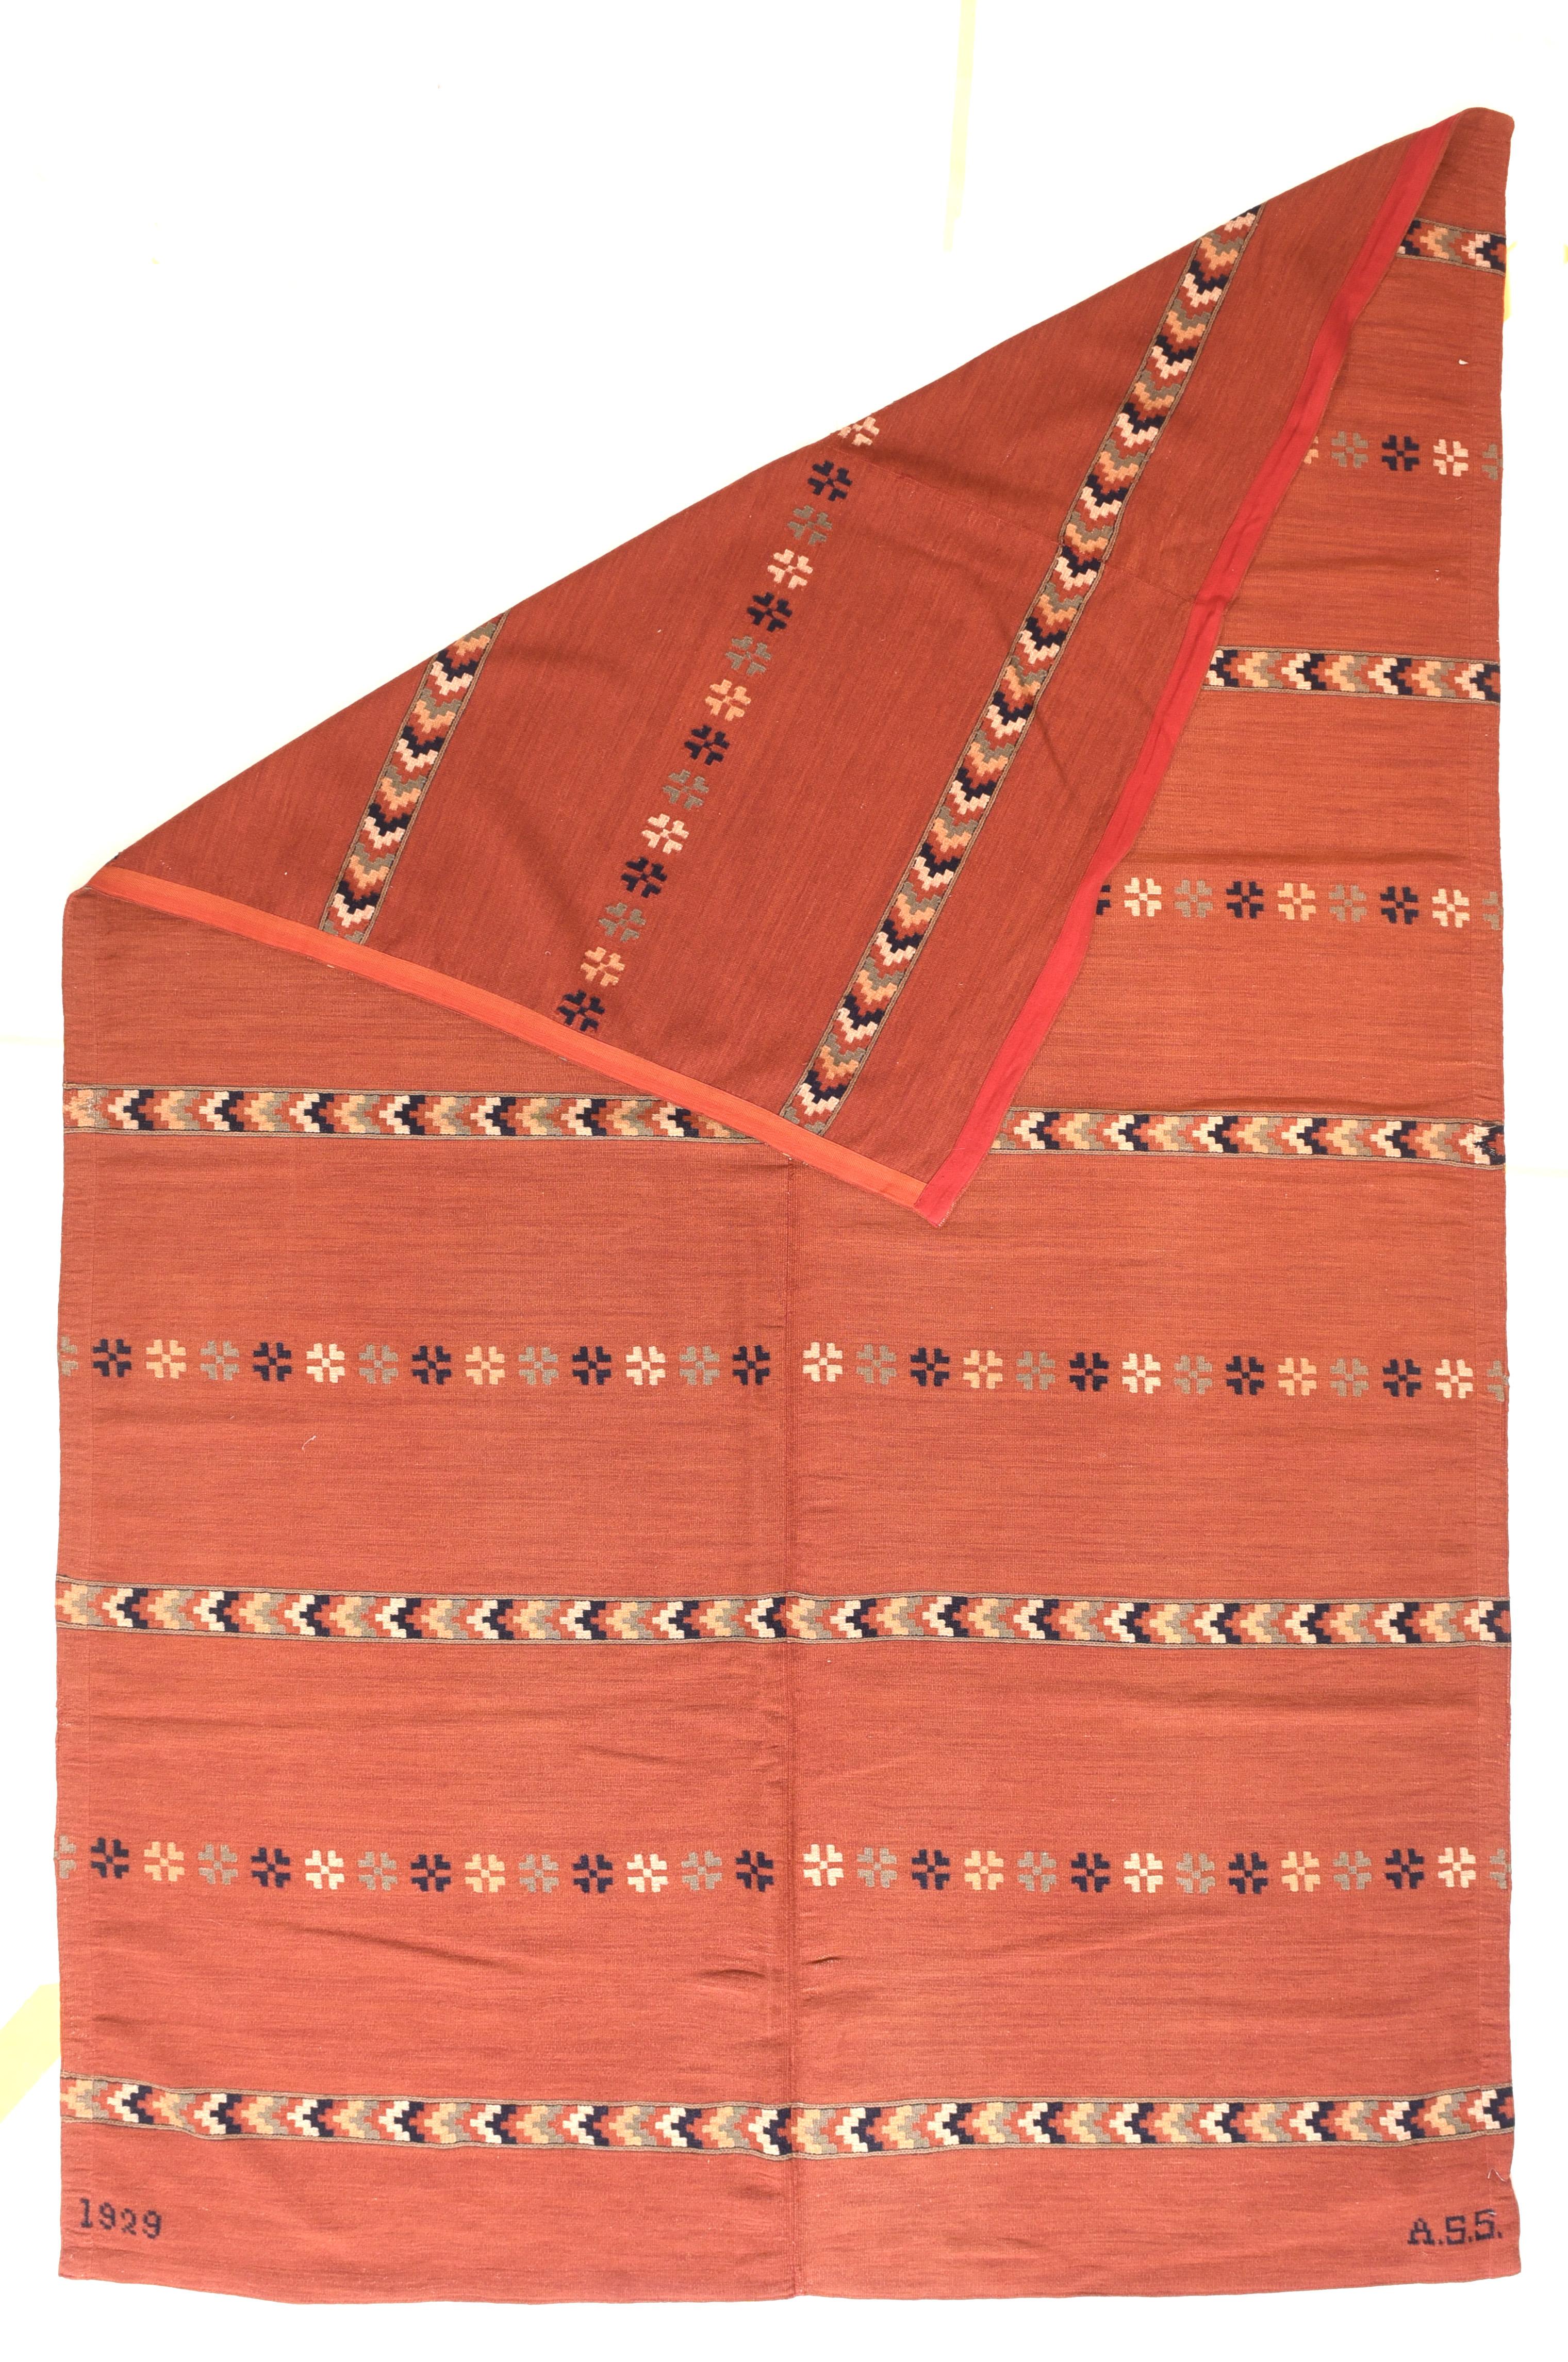 Vintage Swedish Kilim Rug 5'4'' x 6'. A Scandinavian flatwoven cover with bands of extra-weft patterning on a salmon-rust ground. The borderless weft-faced woolen two-section ground is patterned by nine extra-weft woven bands alternating with